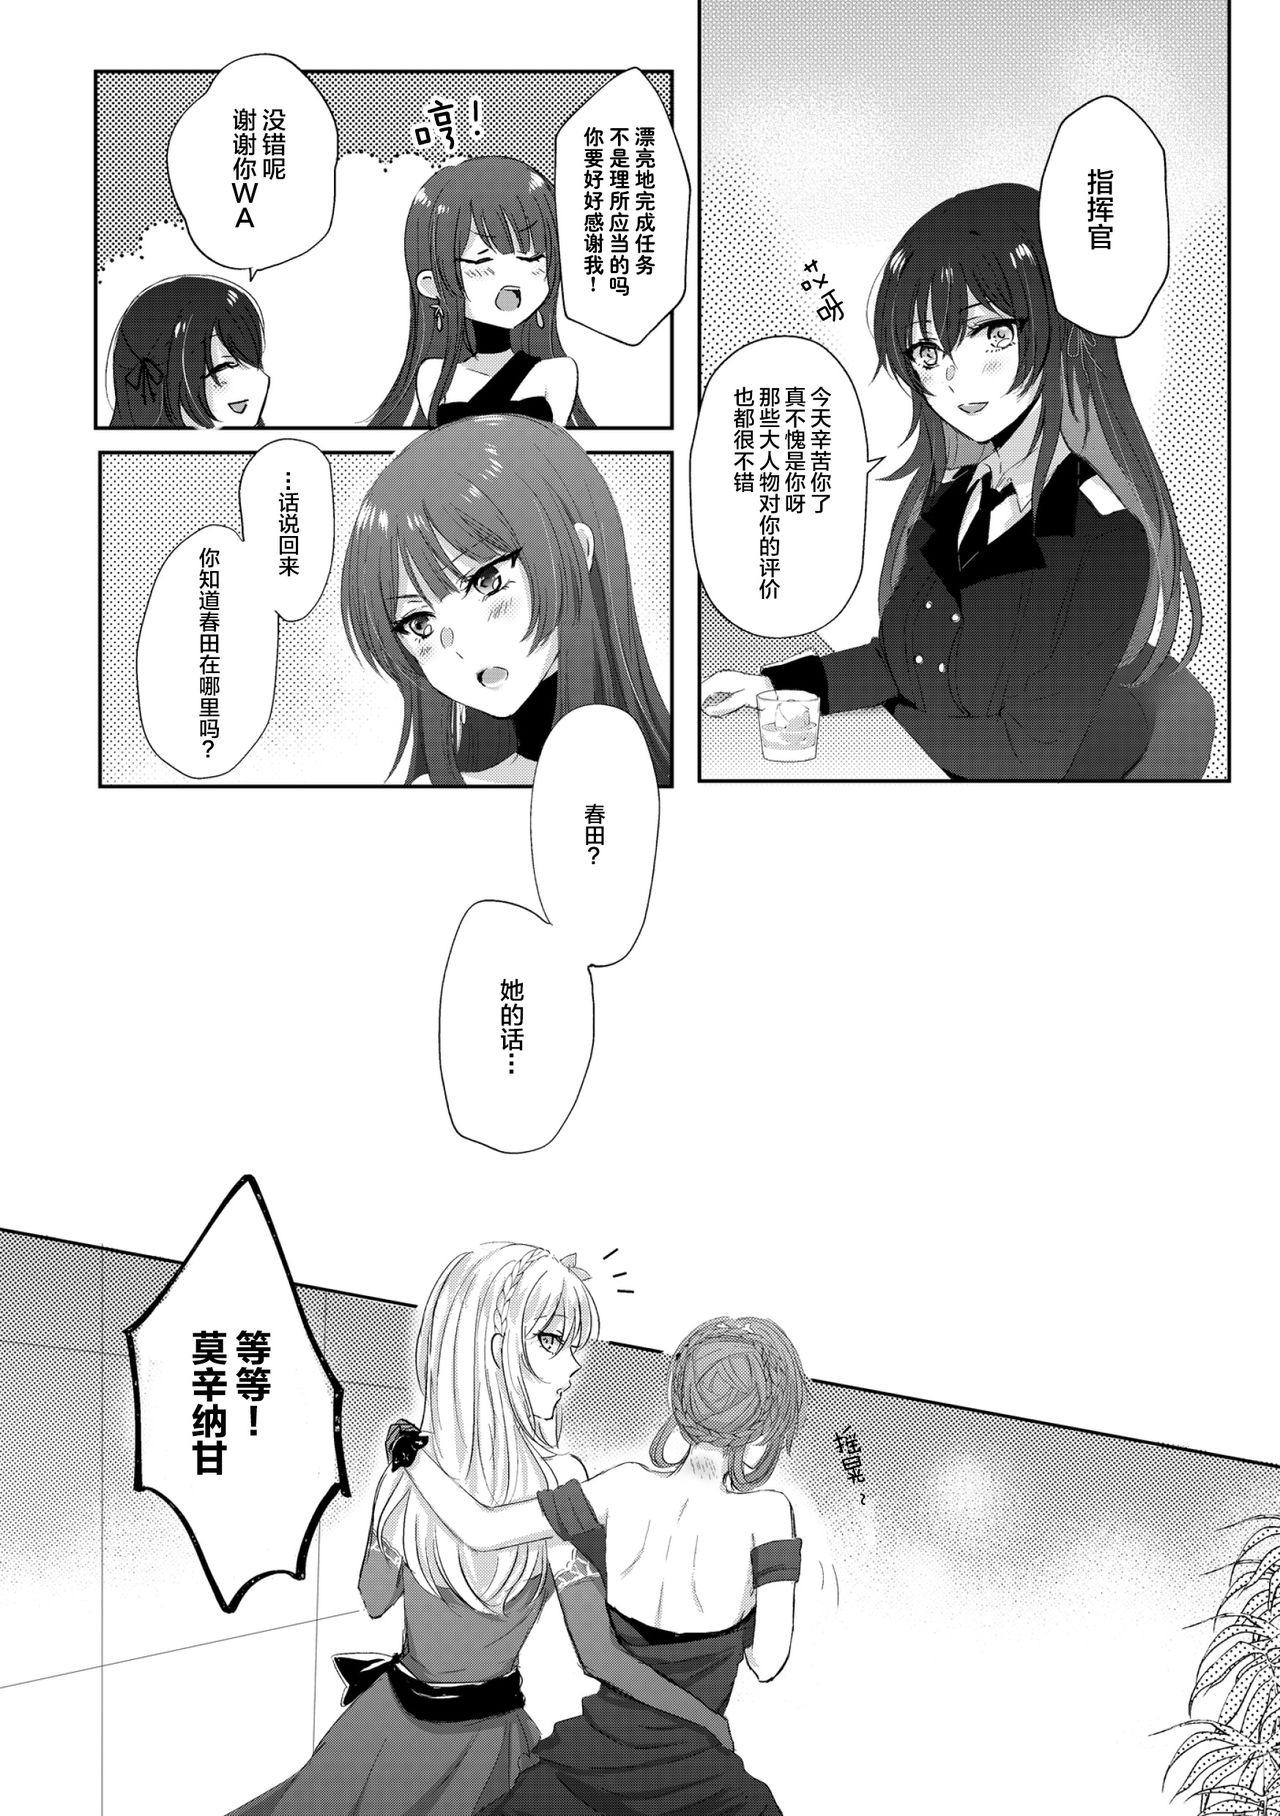 Submission [(Yuri=18L)sui] Alcohol wa Amai (Girls' Frontline) [Chinese] | 酒精是甘甜滋味 (少女前線) [提黄灯喵汉化组] - Girls frontline Breasts - Page 9